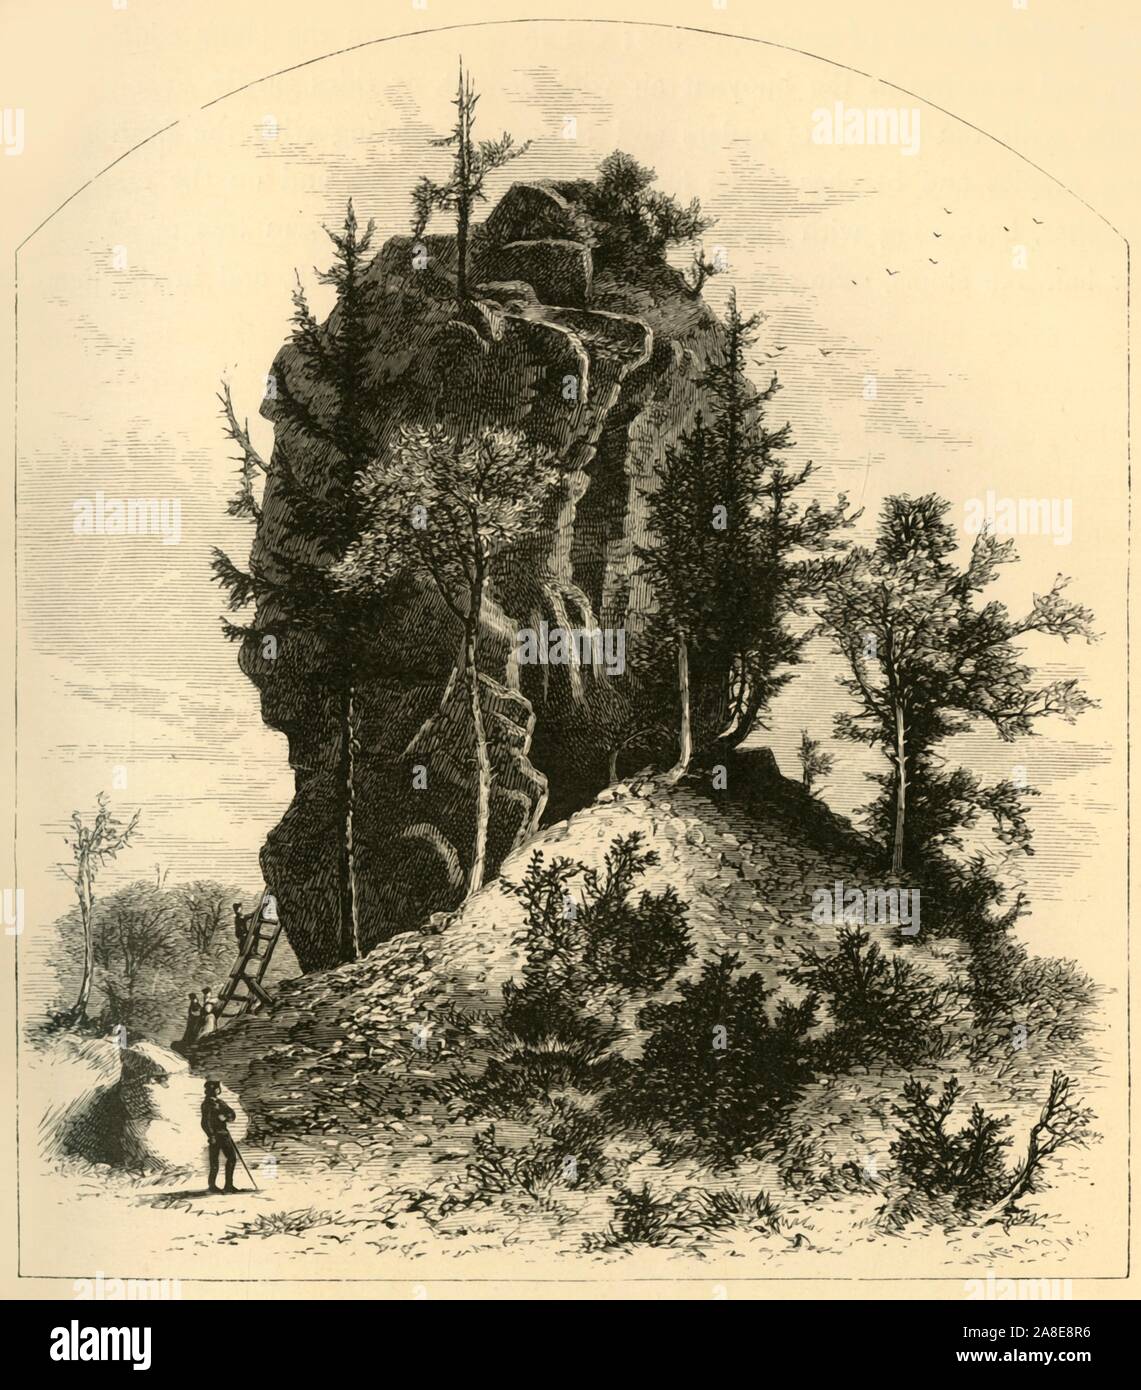 'Sugar-Loaf Rock - (West Side)', 1872. 75-foot-high rock stack formed by post-glacial erosion on Mackinac Island, Lake Huron, Michigan, USA. From &quot;Picturesque America; or, The Land We Live In, A Delineation by Pen and Pencil of the Mountains, Rivers, Lakes...with Illustrations on Steel and Wood by Eminent American Artists&quot; Vol. I, edited by William Cullen Bryant. [D. Appleton and Company, New York, 1872] Stock Photo